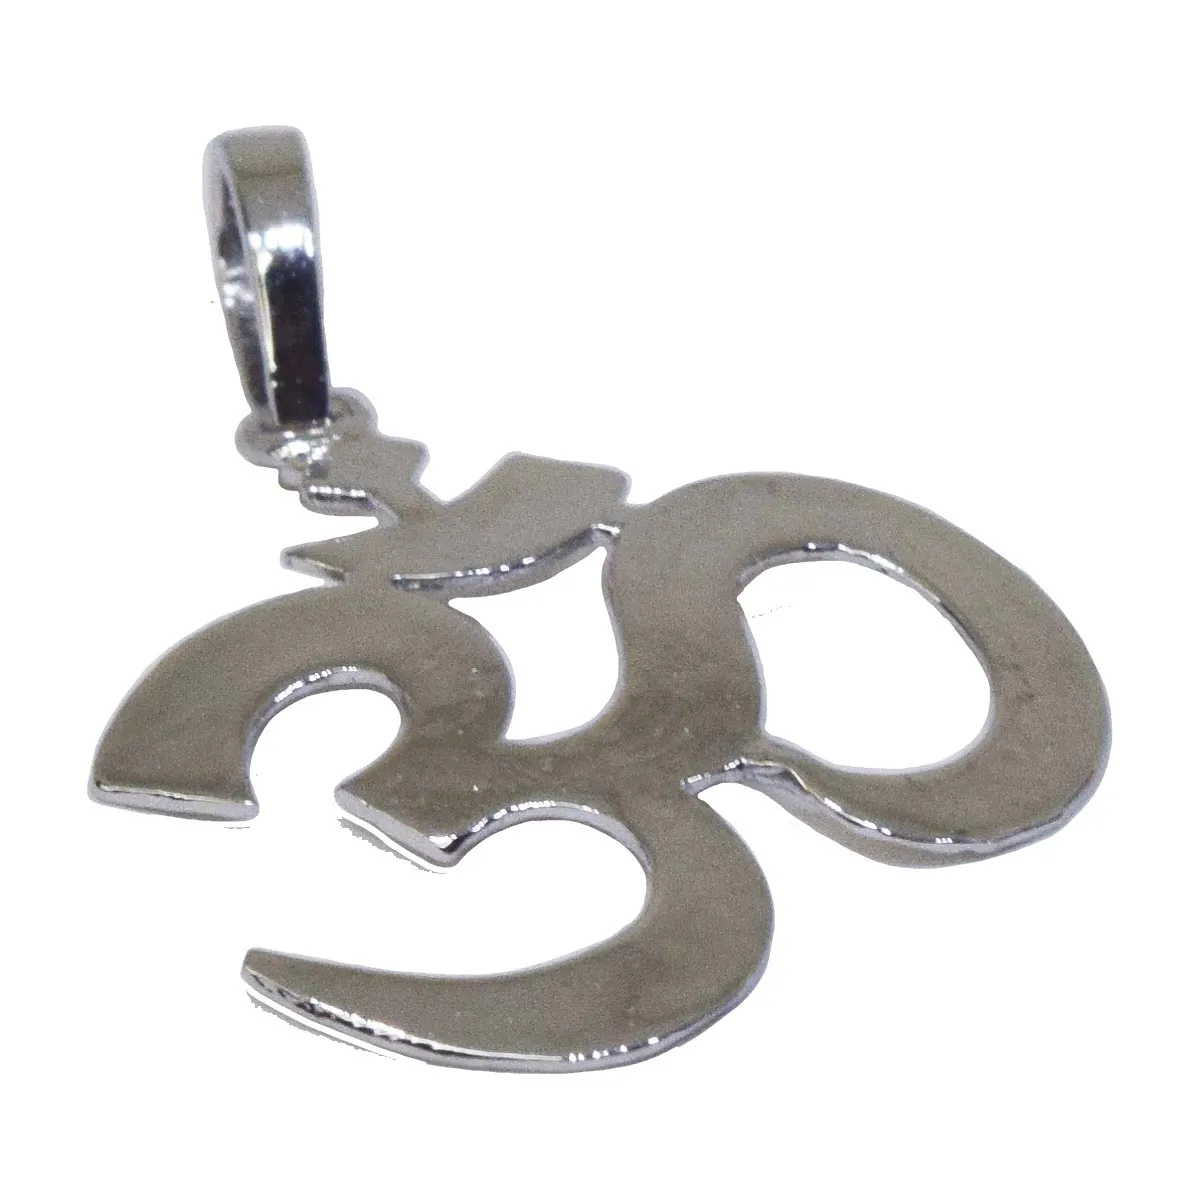 OM Religious Pendant in 925 Sterling Silver (SDS324)